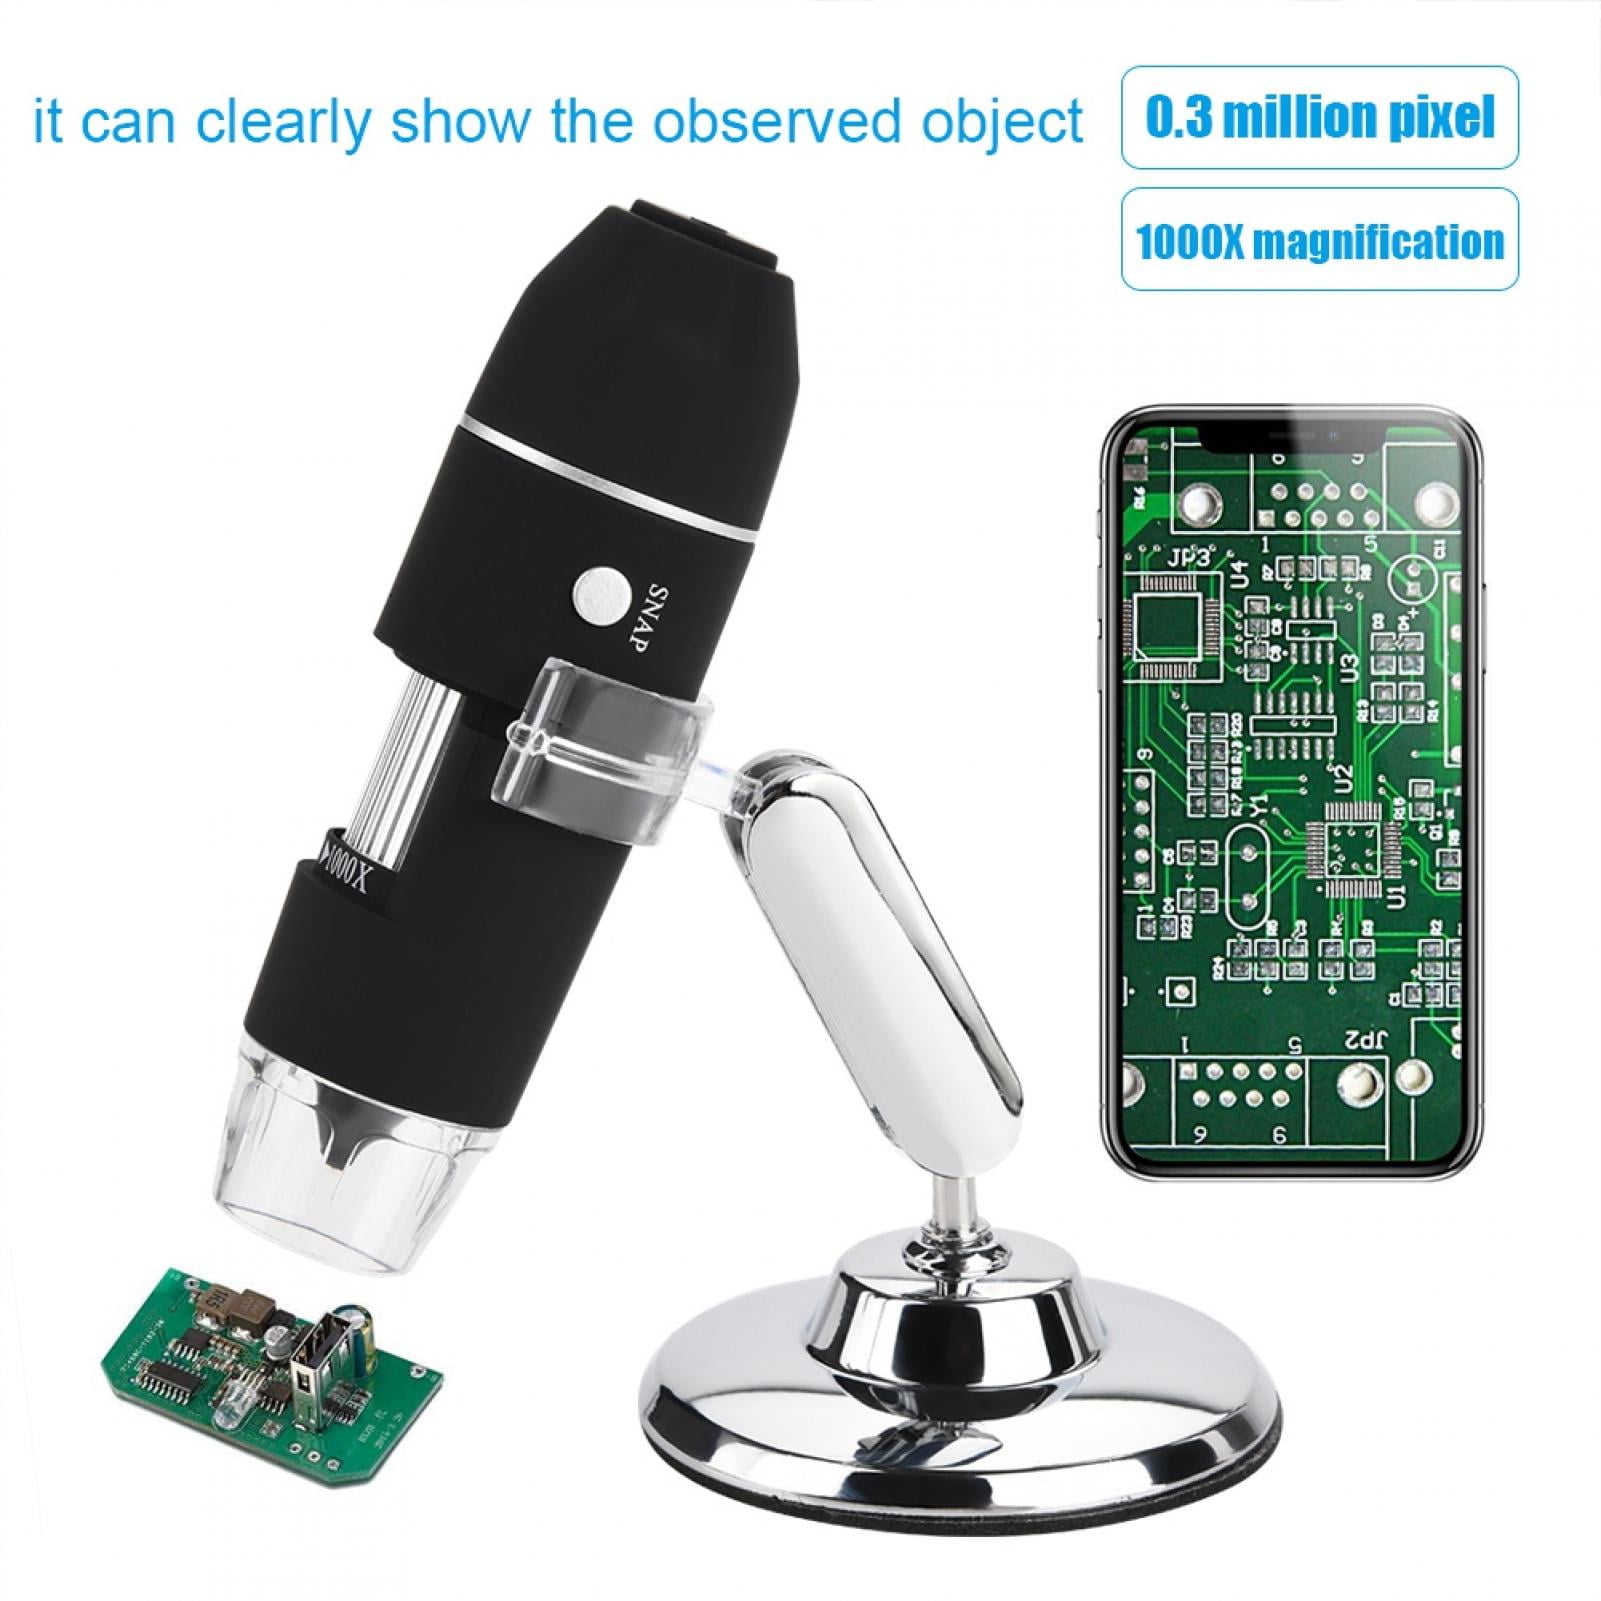 HD Microscope Soft and Not Dazzling Light Source 0.3 Million USB Microscope 3 in 1 Interface for Student Adult 